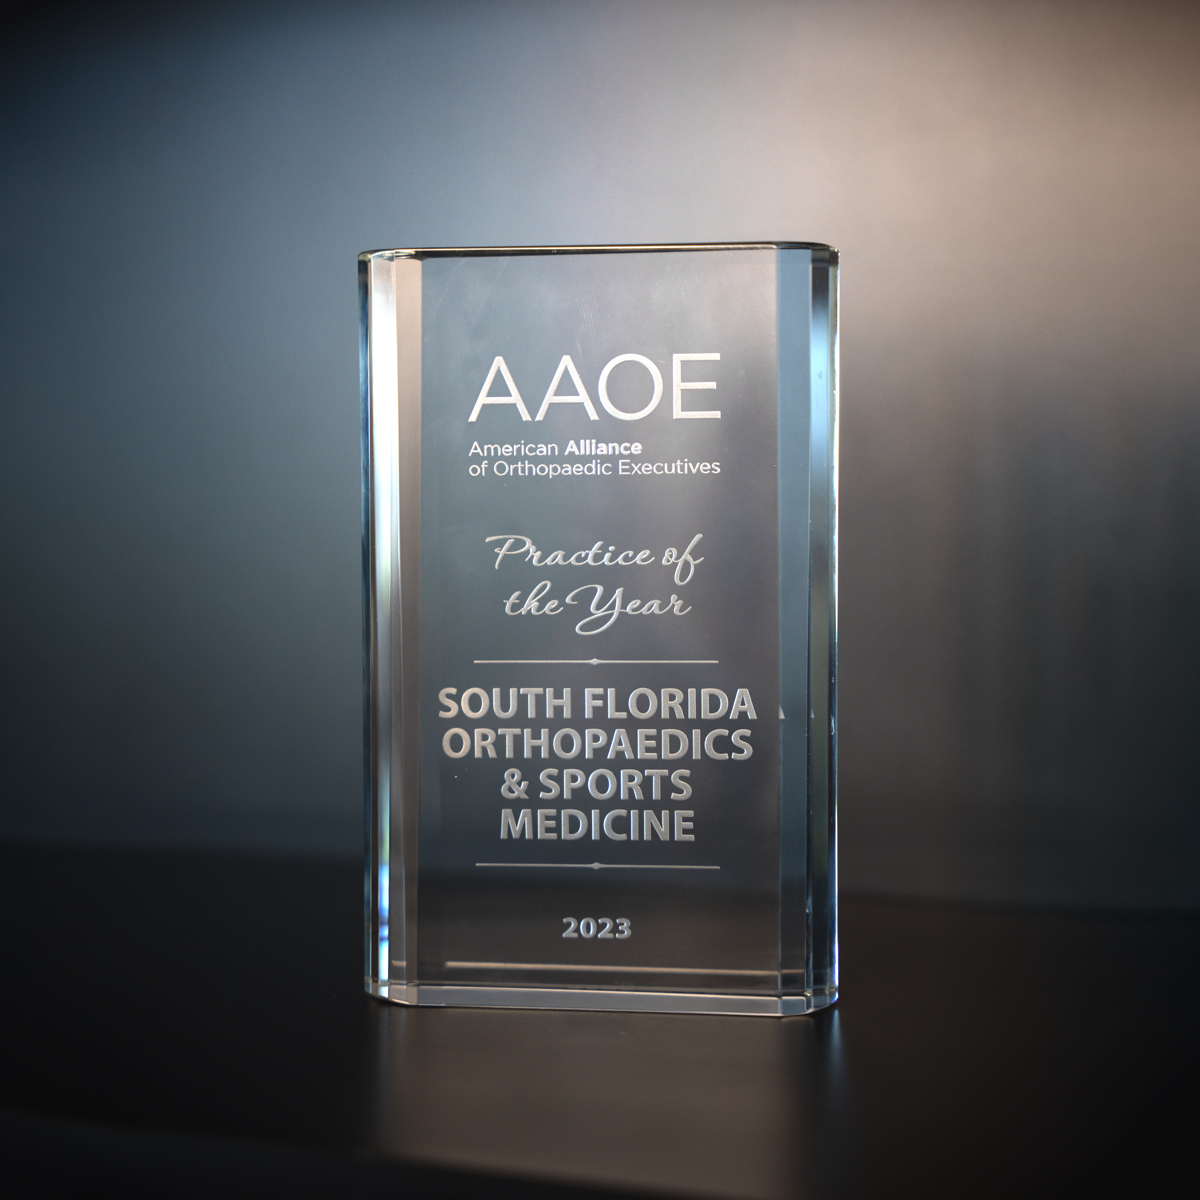 South Florida Orthopaedics & Sports Medicine Named AAOE 2023 Practice of the Year